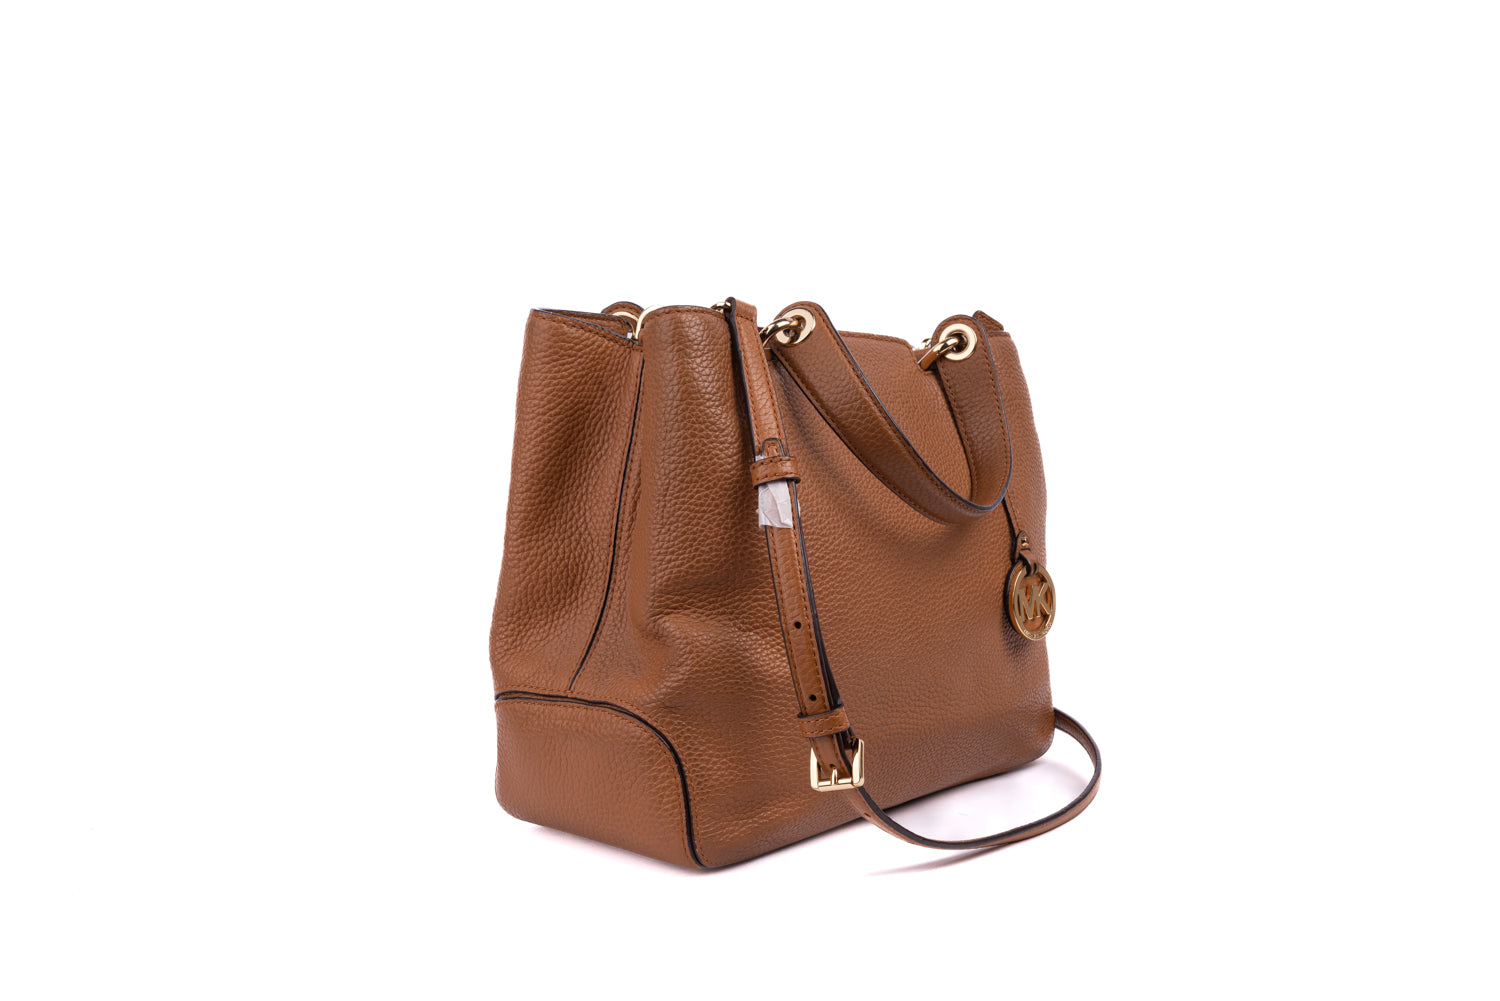 Michael Kors Brown Anabelle Leather Tote Bag